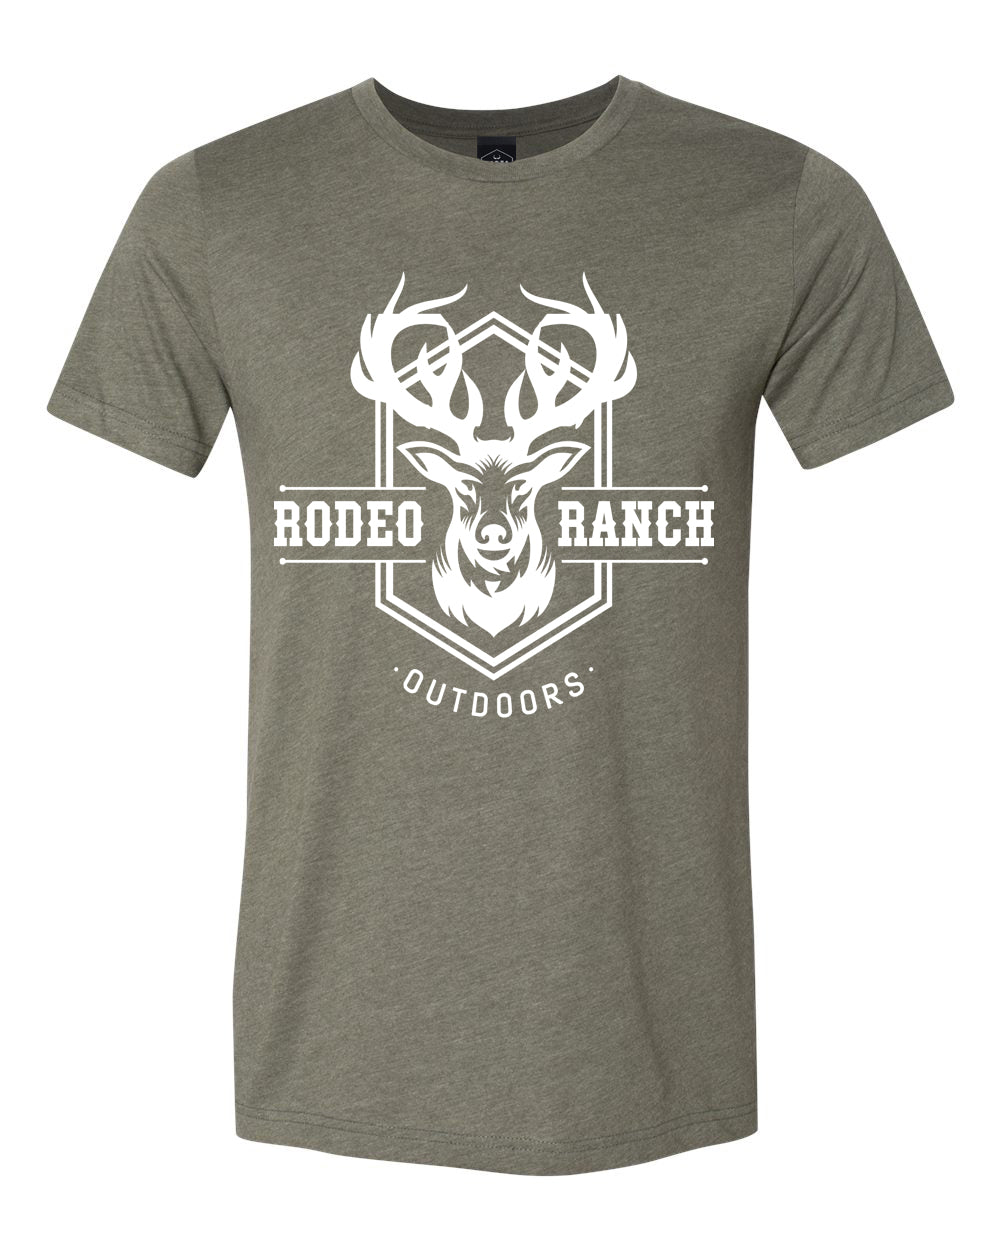 Rodeo Ranch Outdoors Short Sleeve Shirt - Heather Military Green